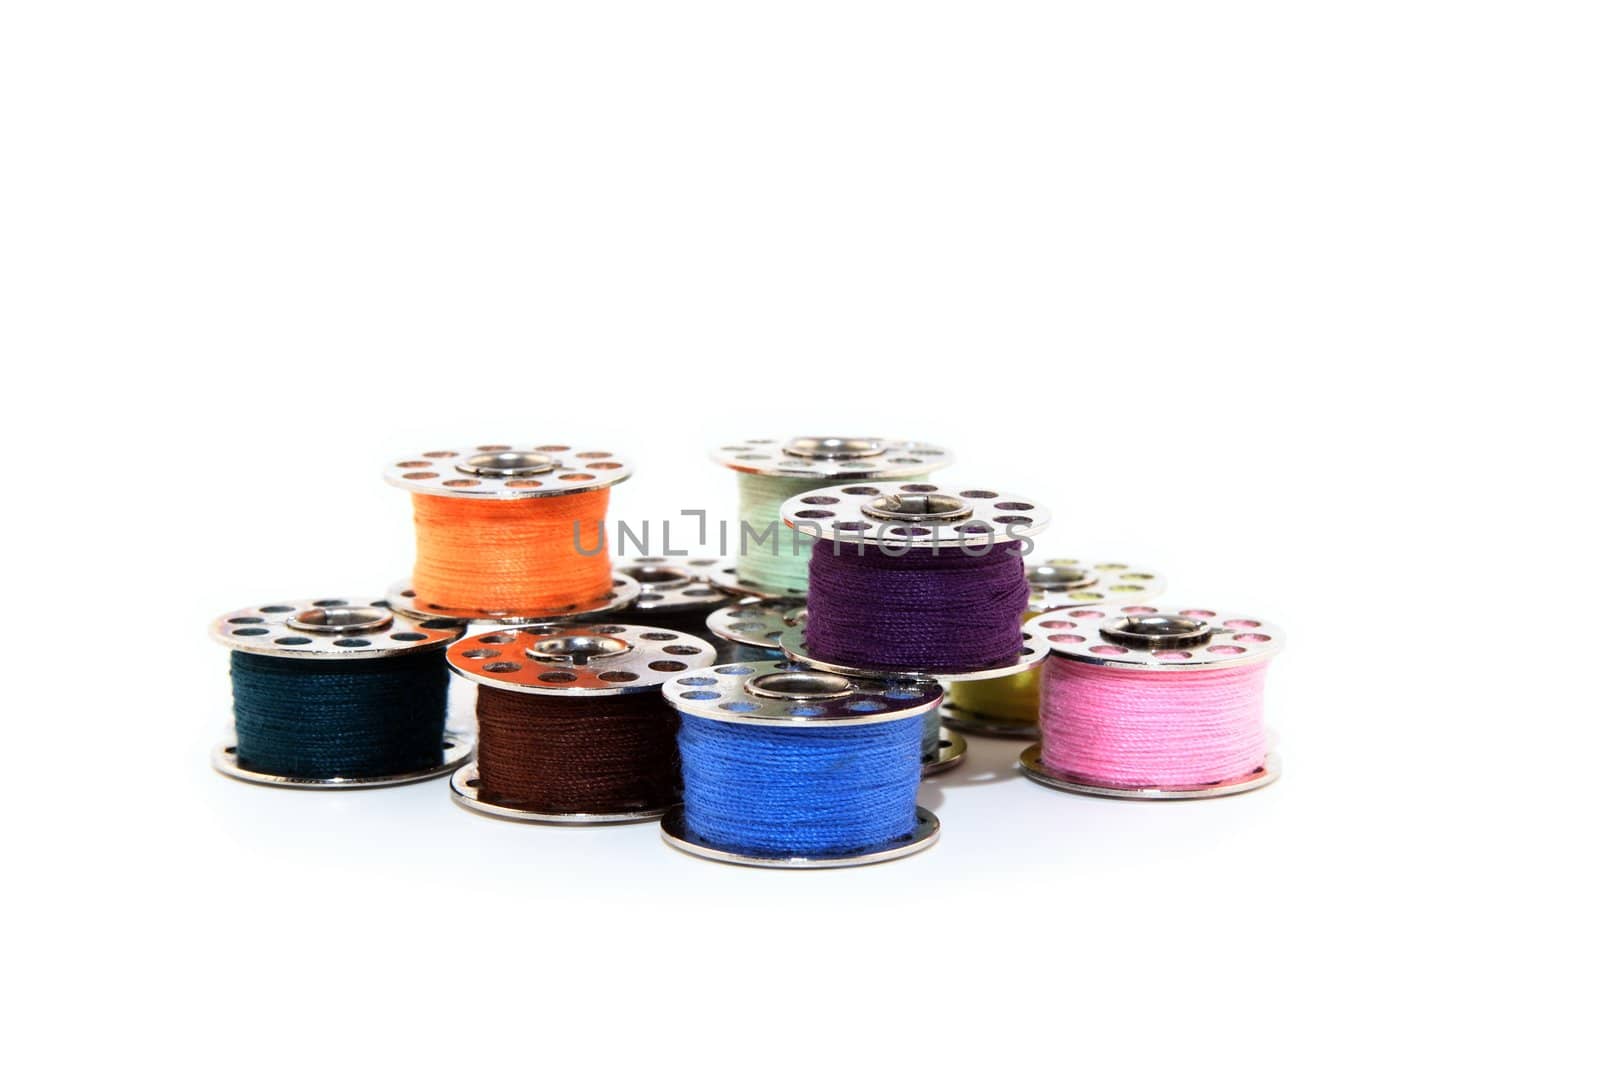 Colorful spools of thread by anikasalsera